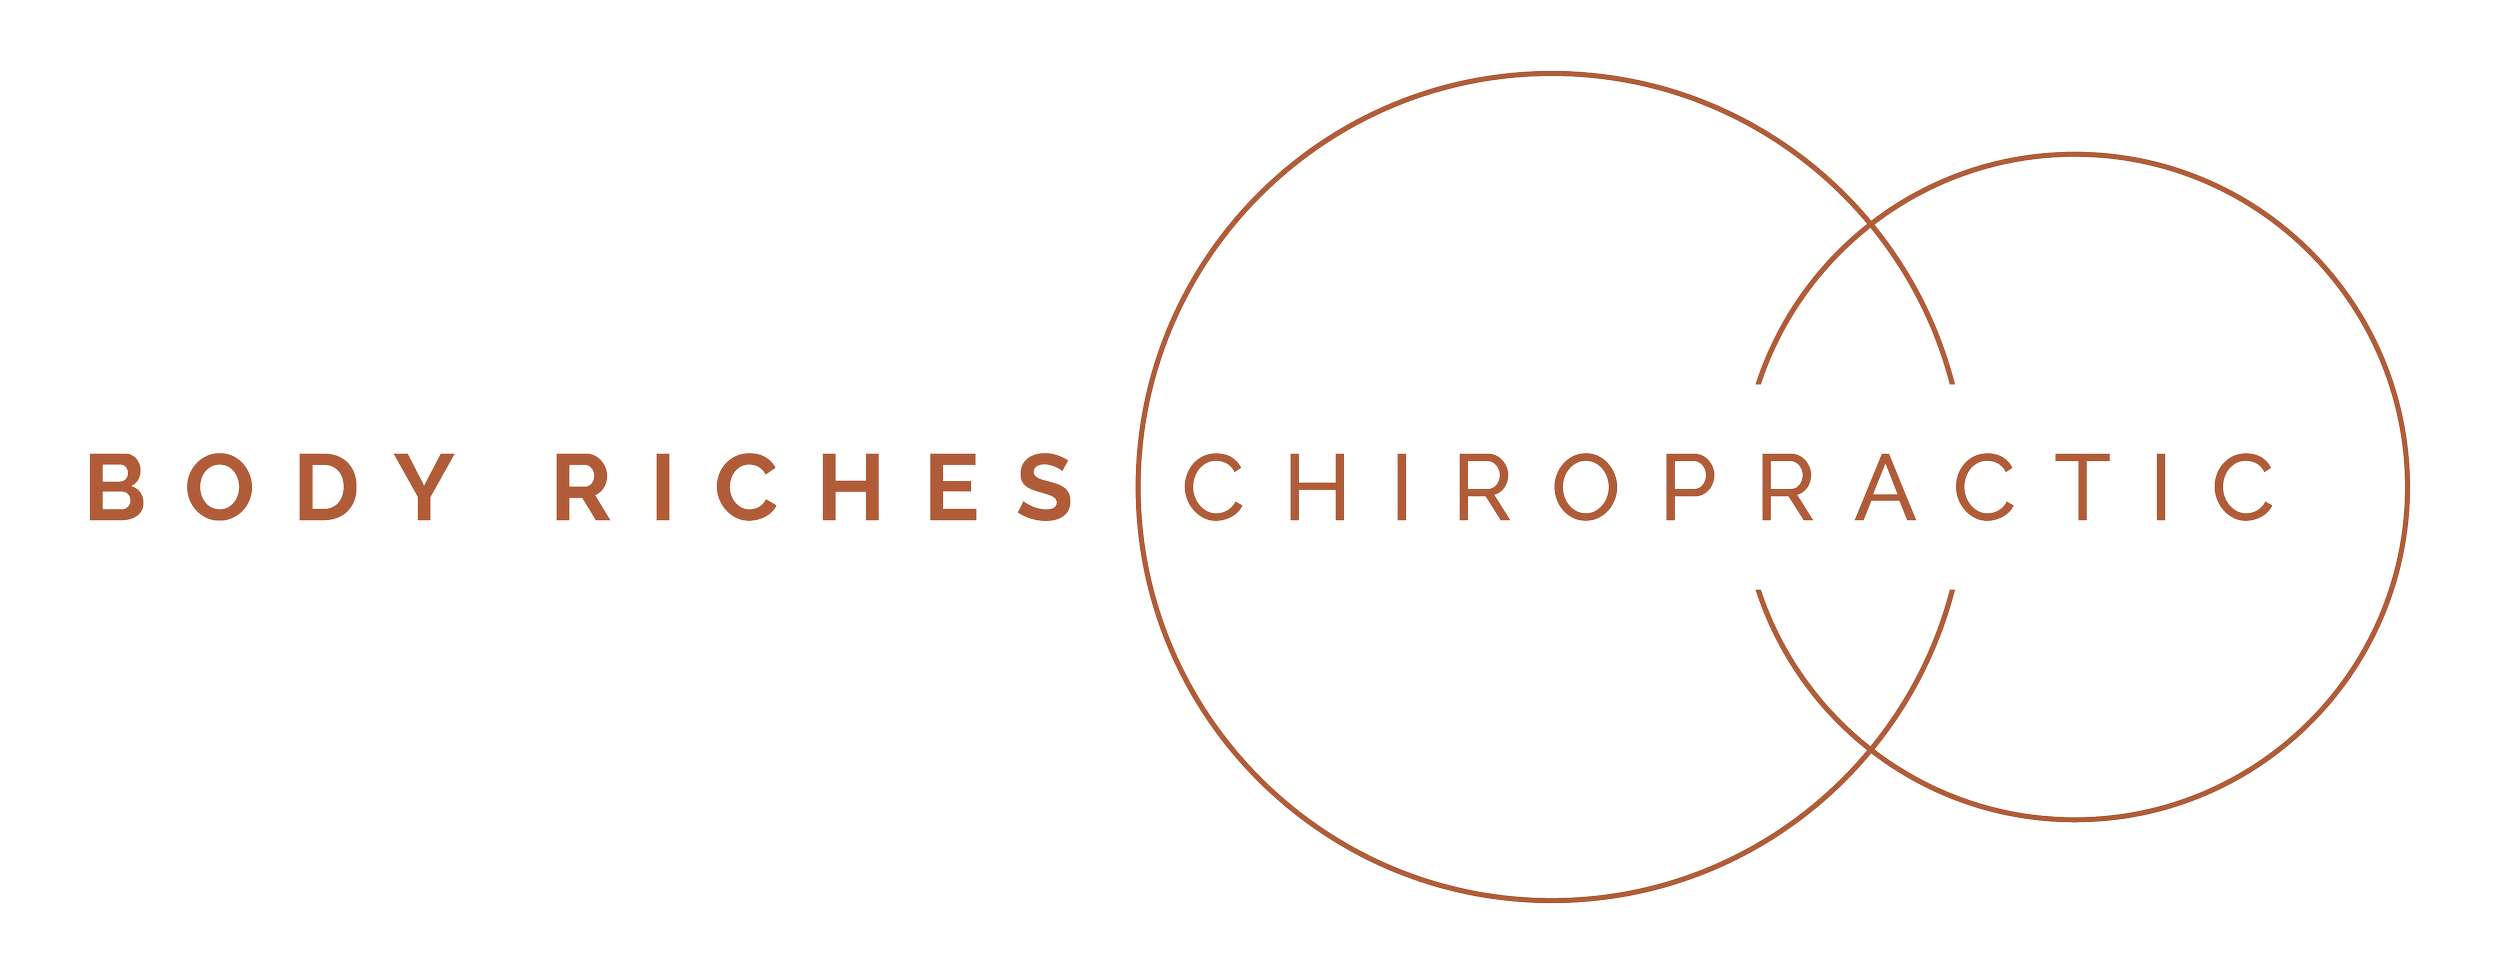 Body Riches Chiropractic